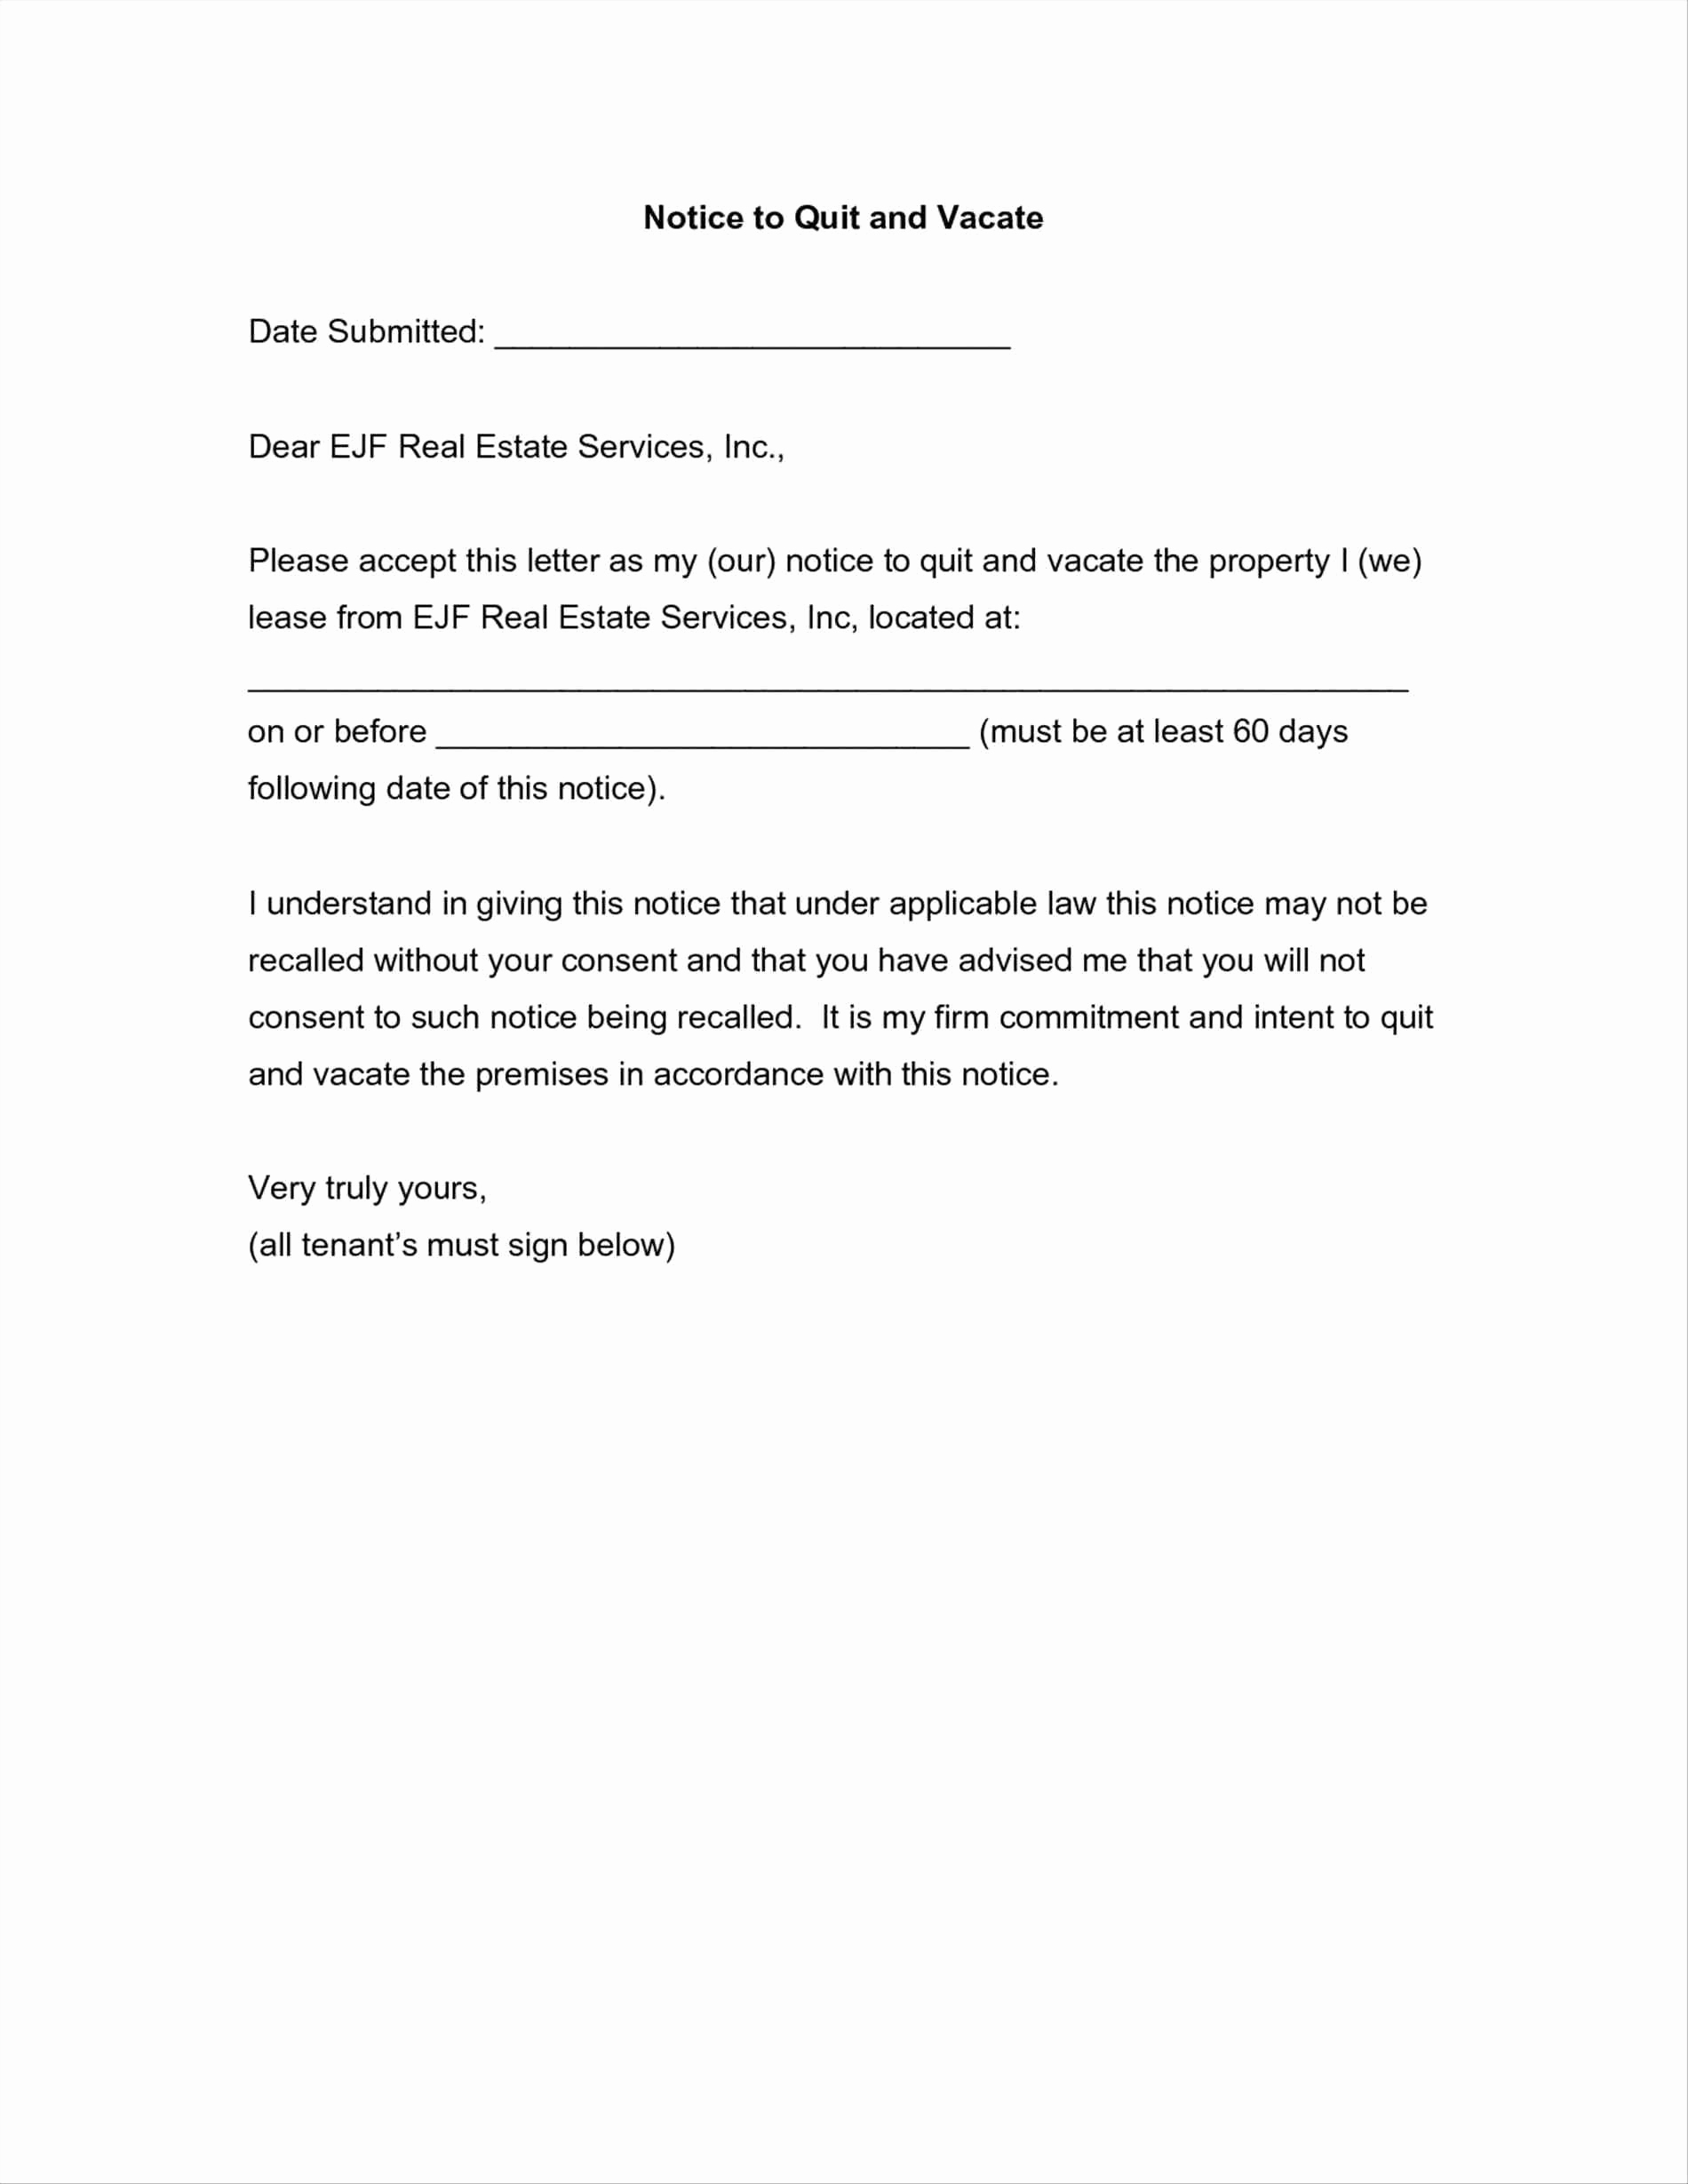 Security Deposit Refund Letter Template - Refund Receipt Template Security Deposit form Letter Re Security